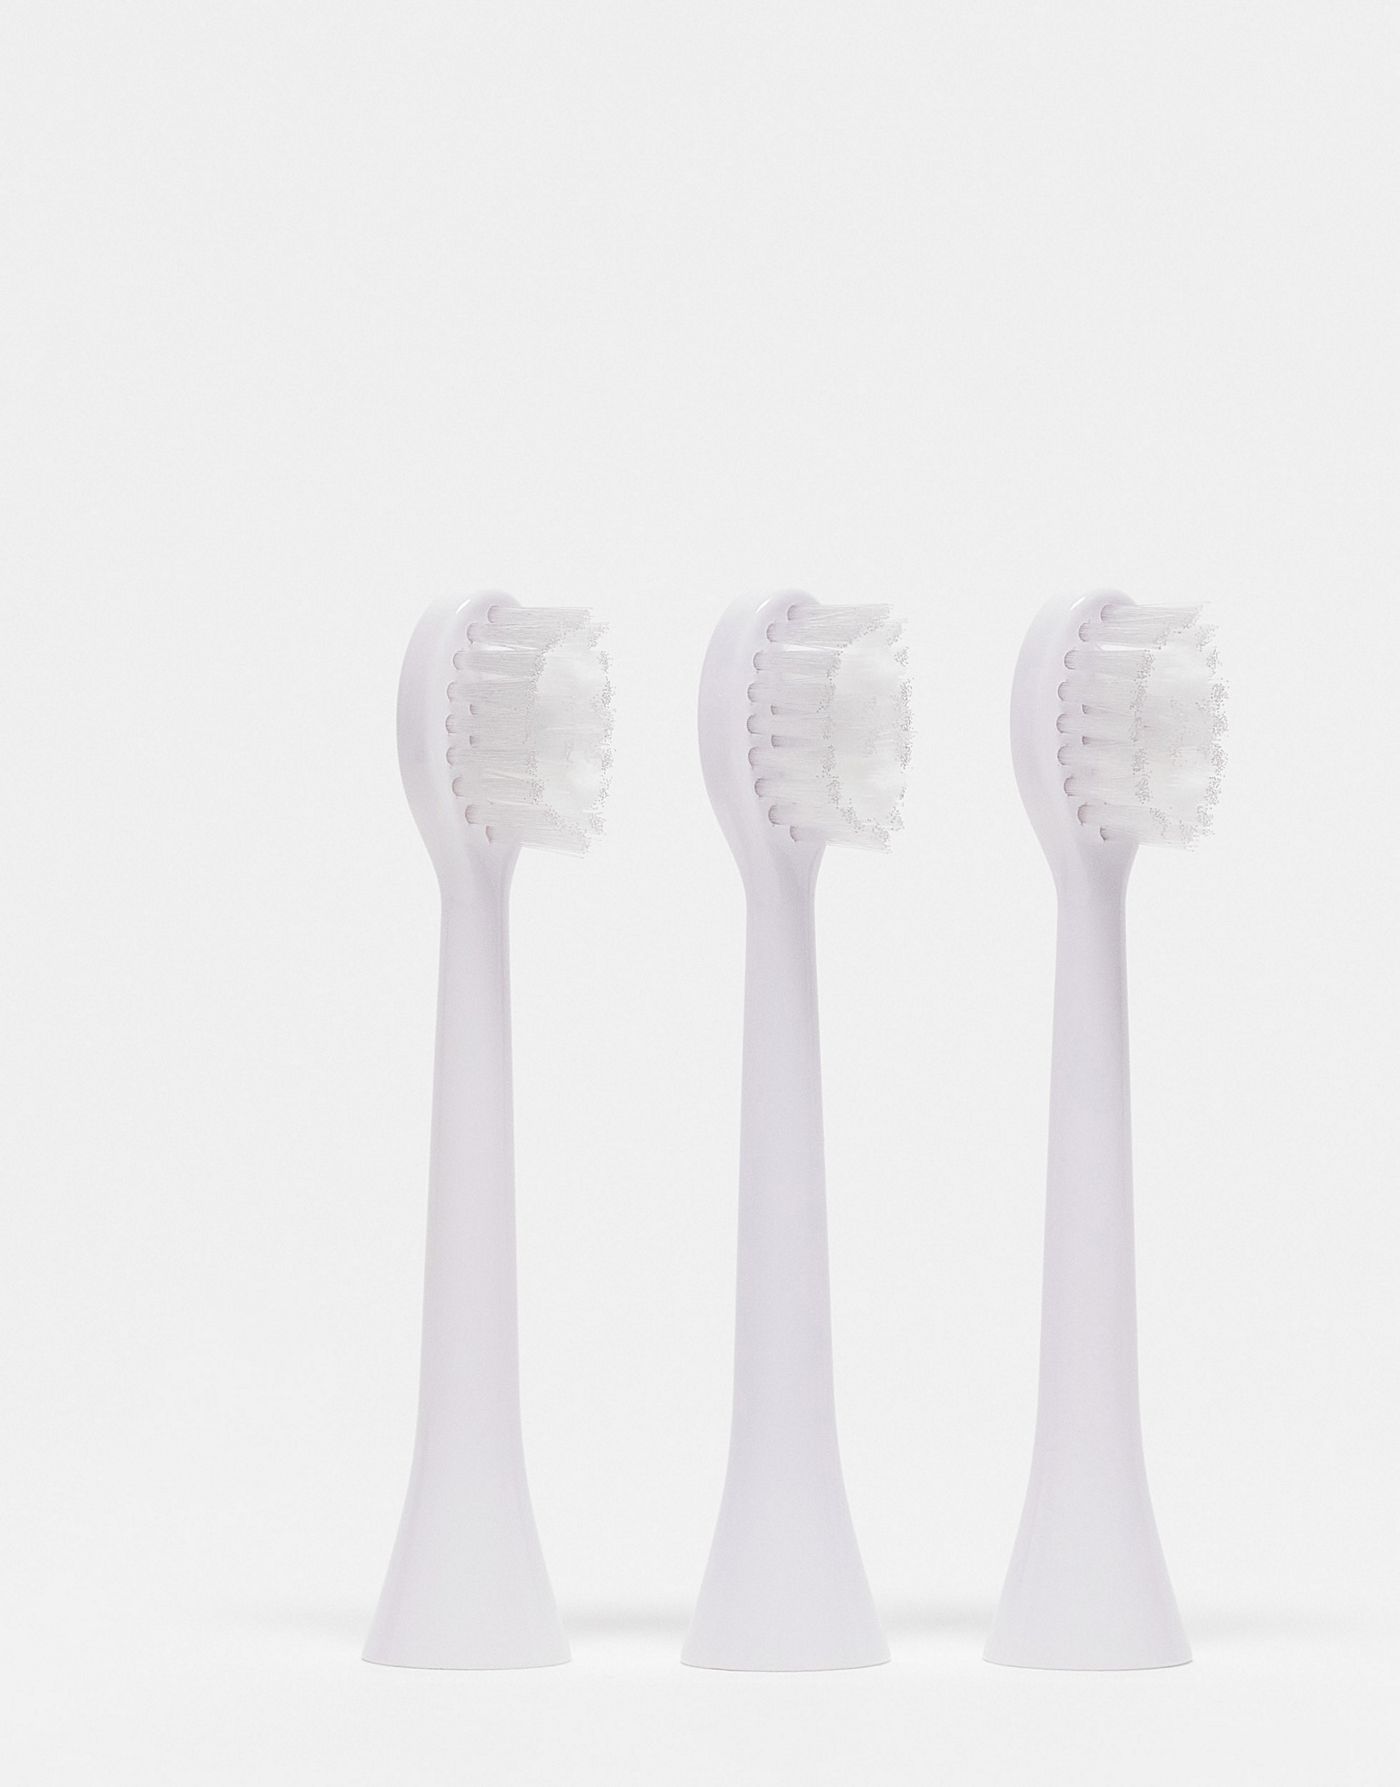 Spotlight Oral Care Sonic Head Replacements in White